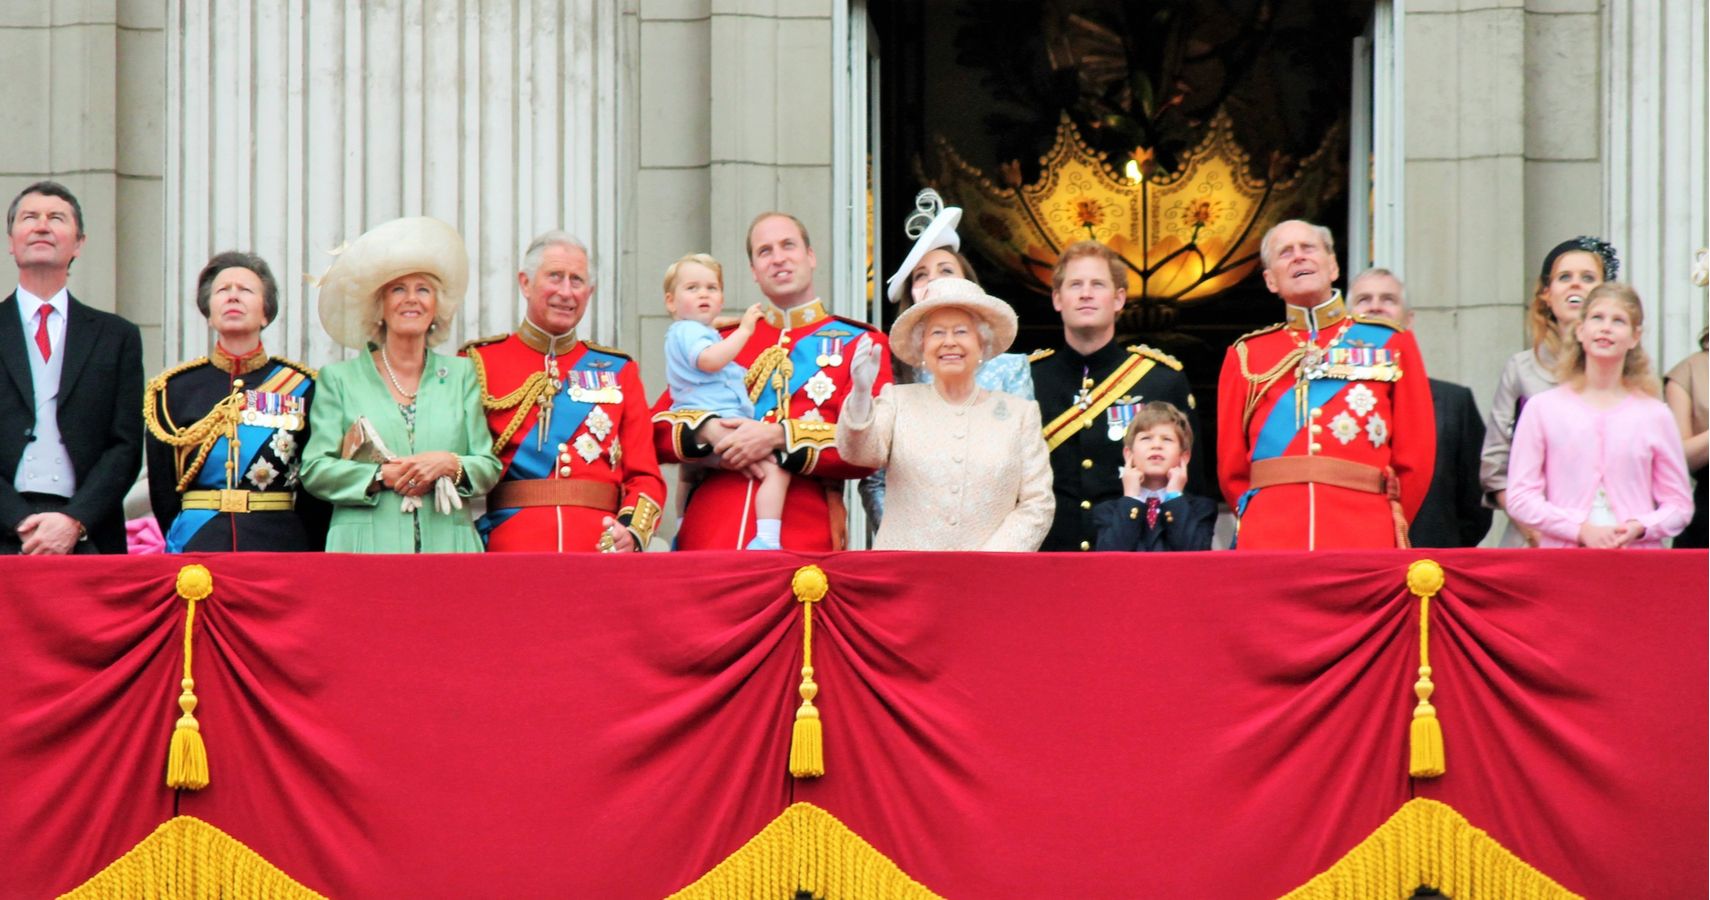 The 10 Richest Royal Families In The World As of 2022, Ranked